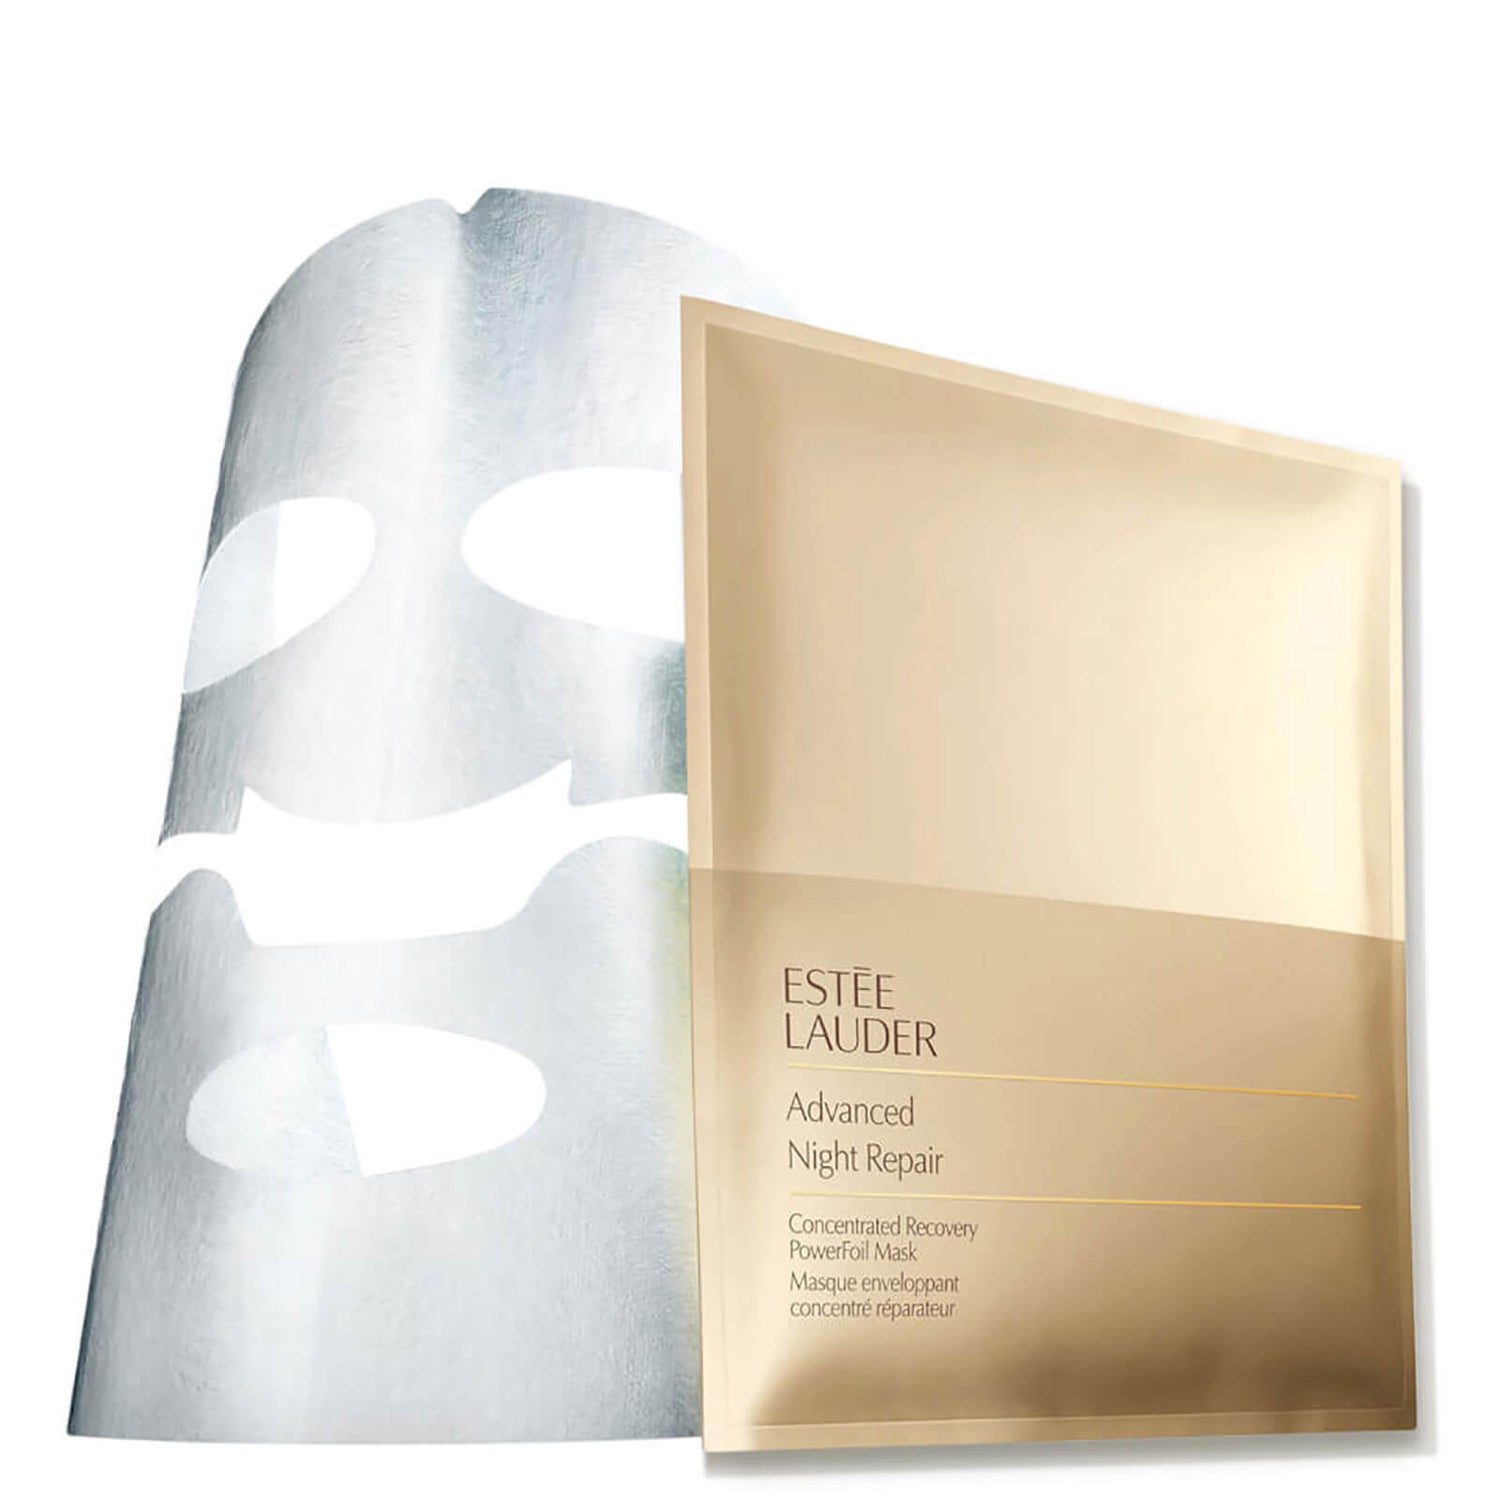 Estée Lauder Advanced Night Repair Concentrated Recovery PowerFoil Mask (4 piece)